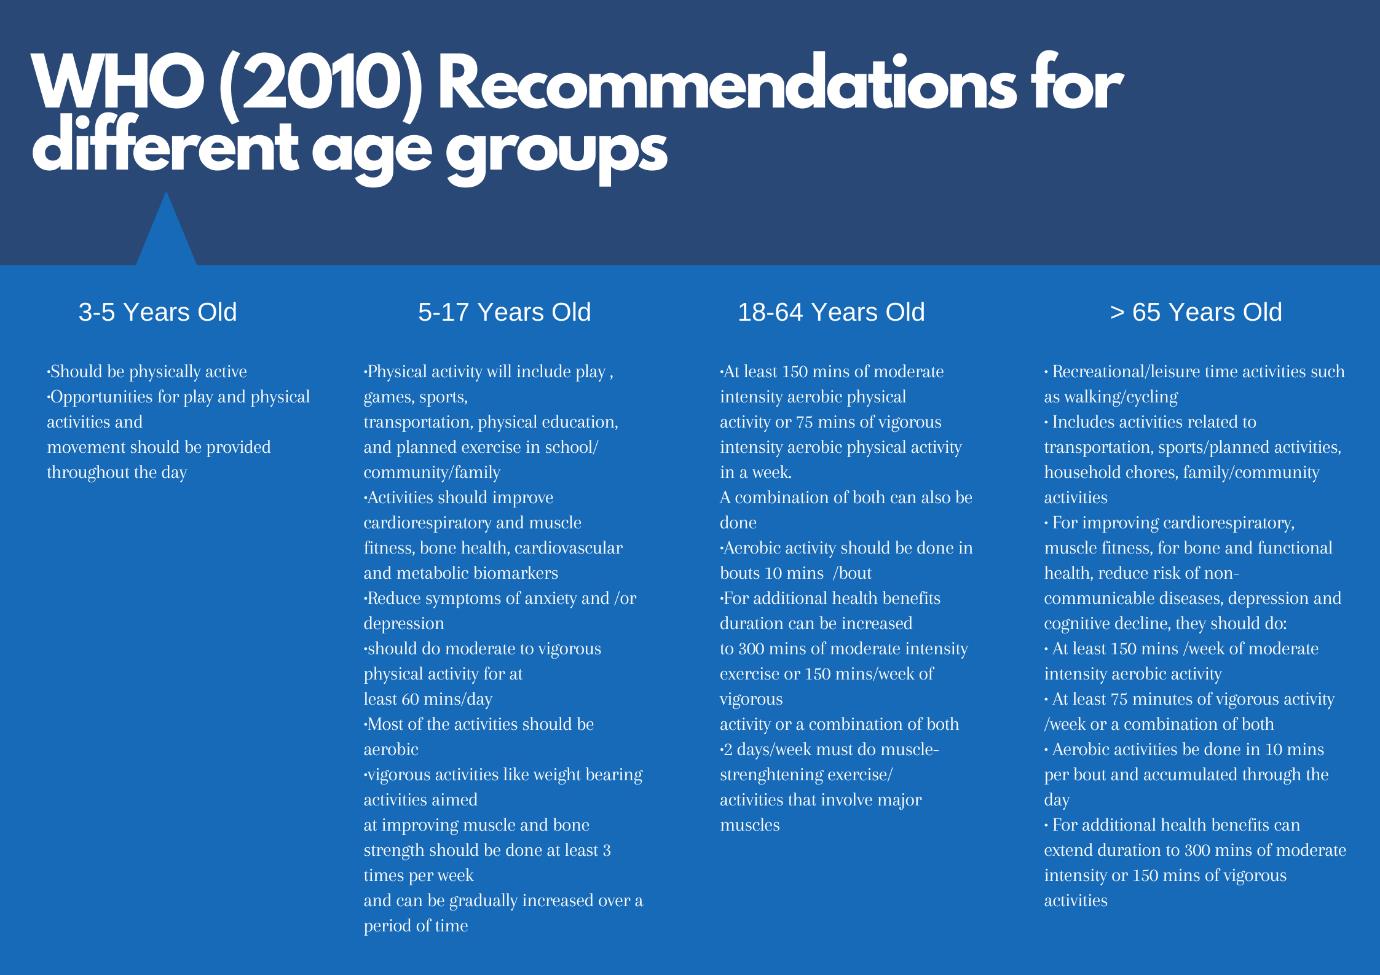 World Health Organization Reports for different age groupin 2010